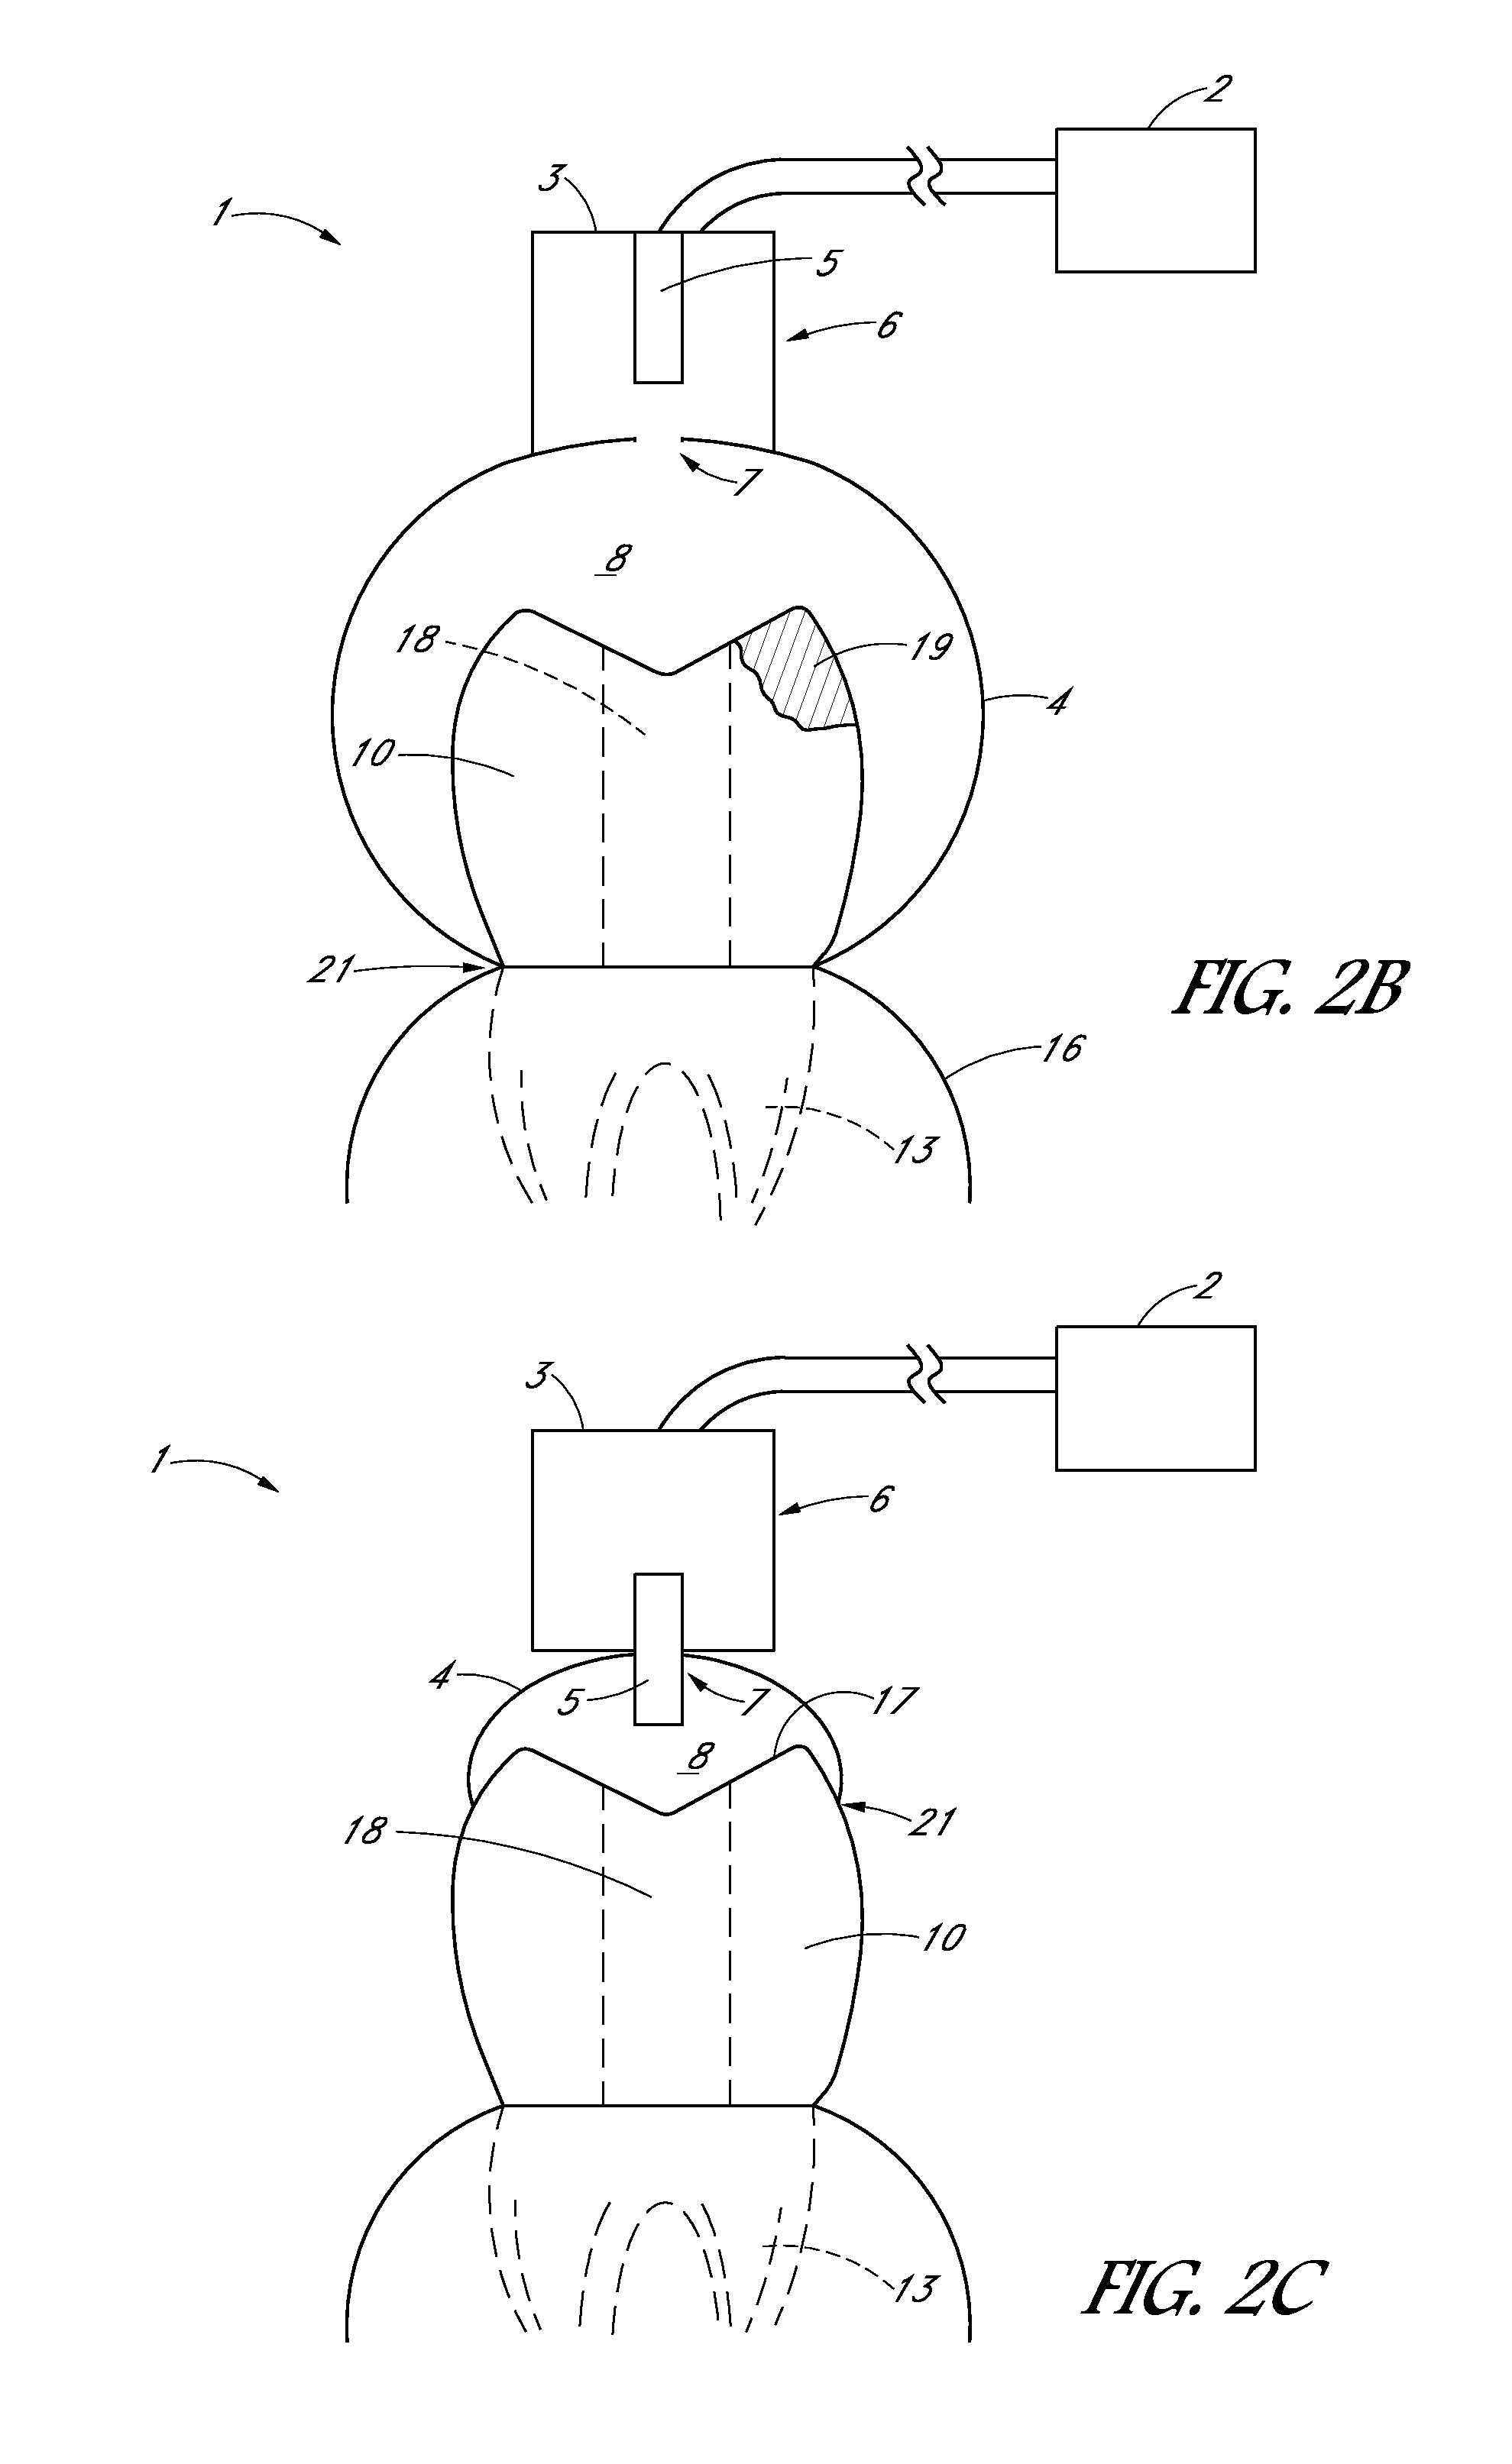 Apparatus and methods for treating teeth